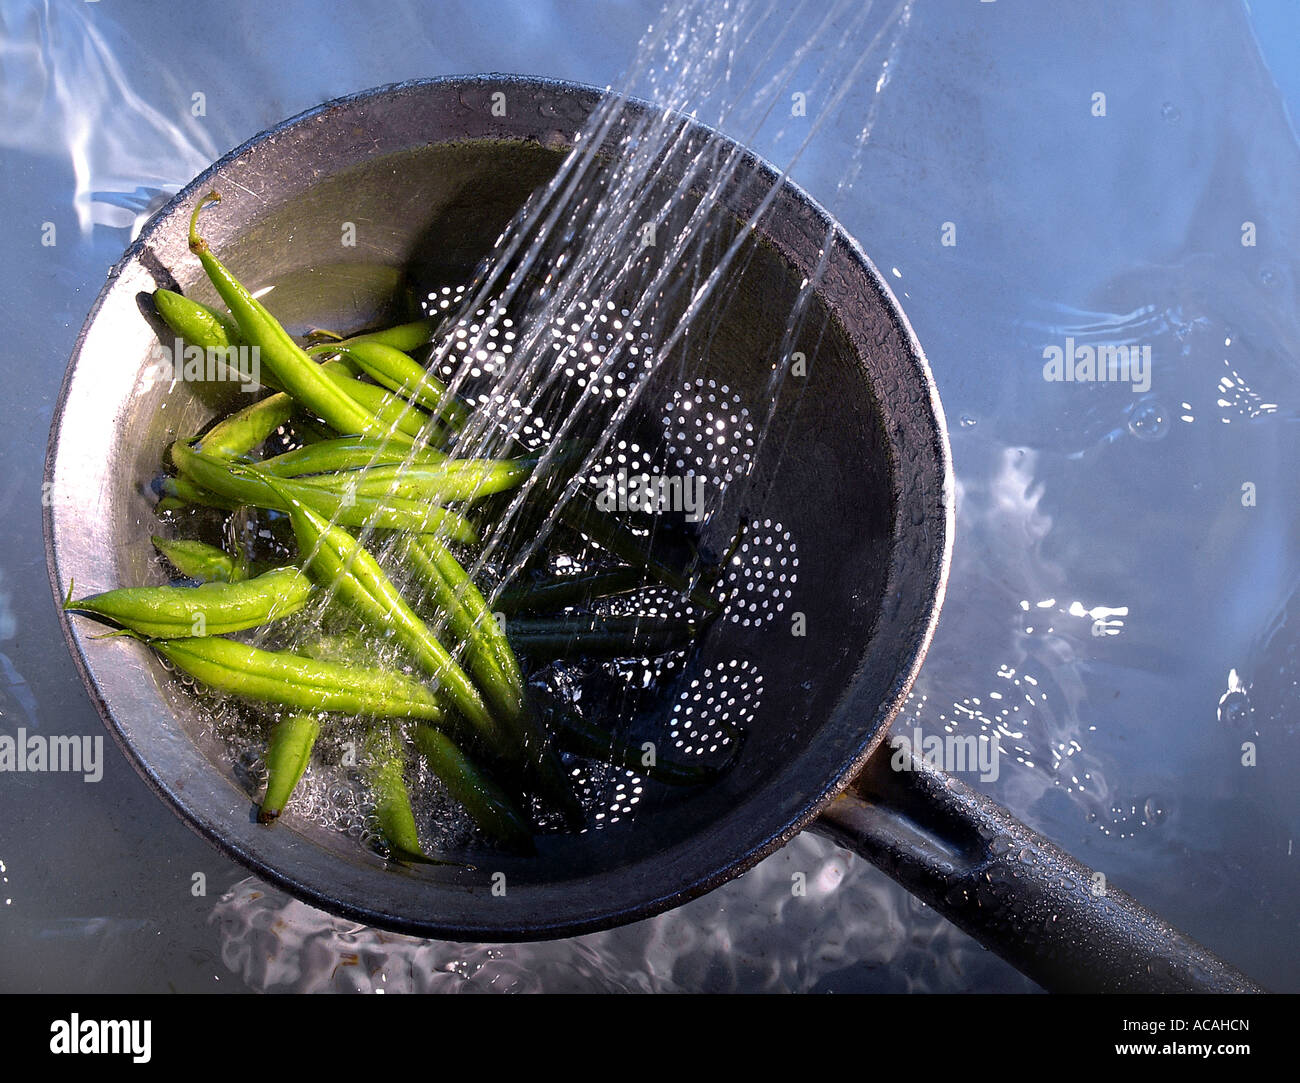 Common beans hosing down in a colander Stock Photo